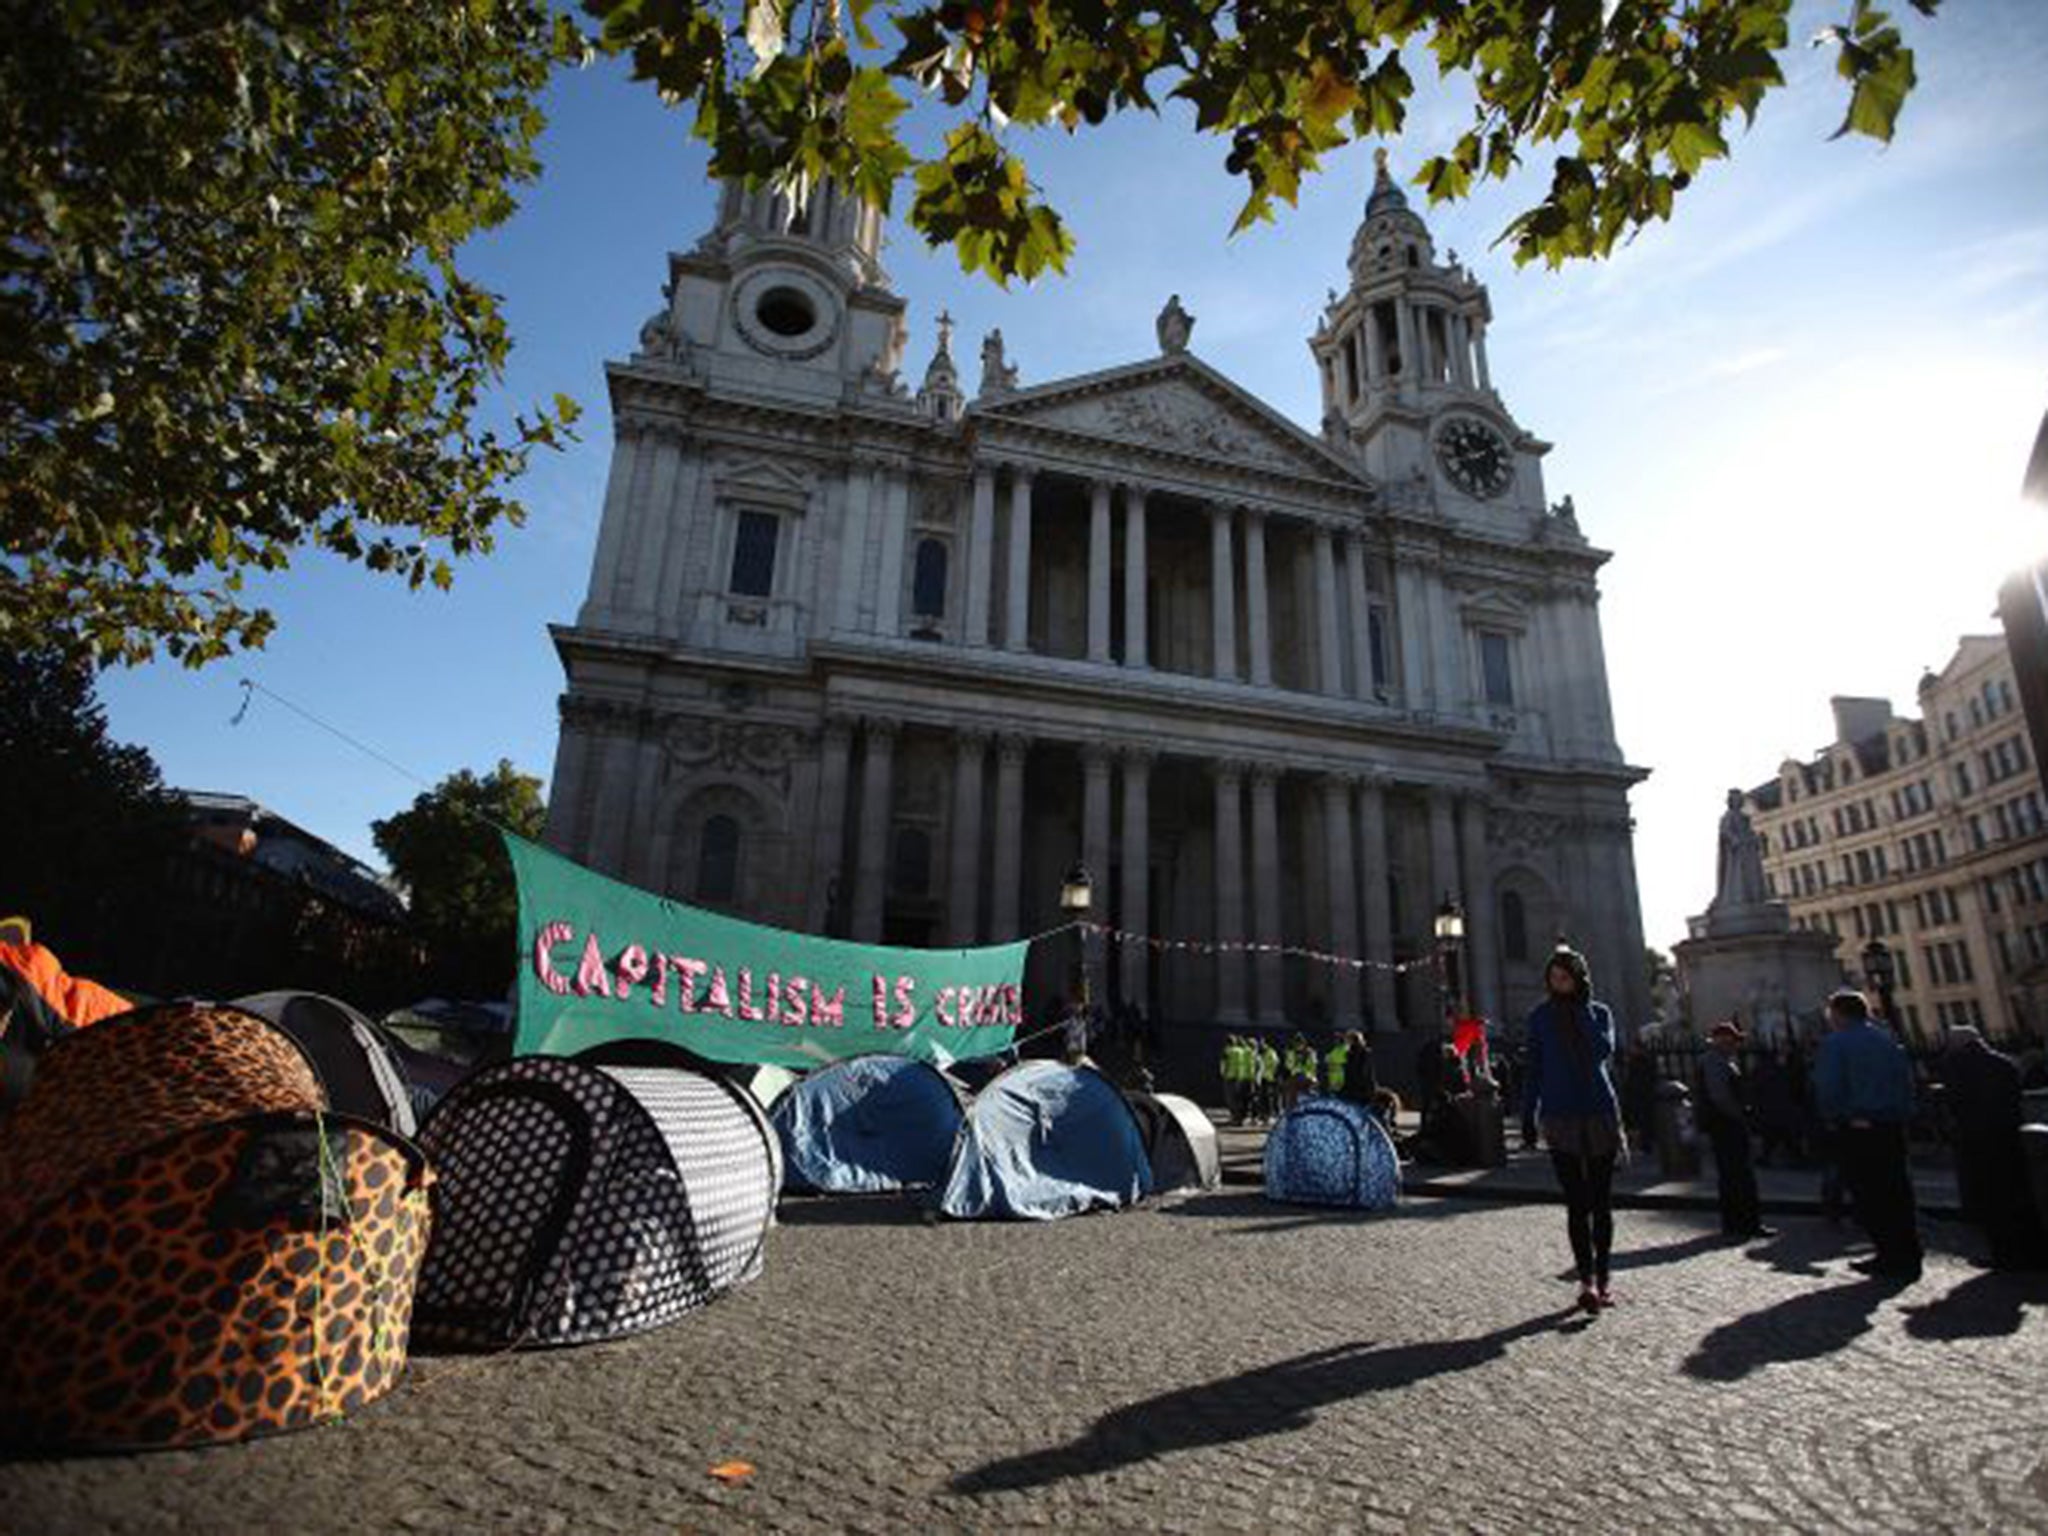 Tents fill the area in front of St Paul's Cathedral during the Occupy London Protests in 2011